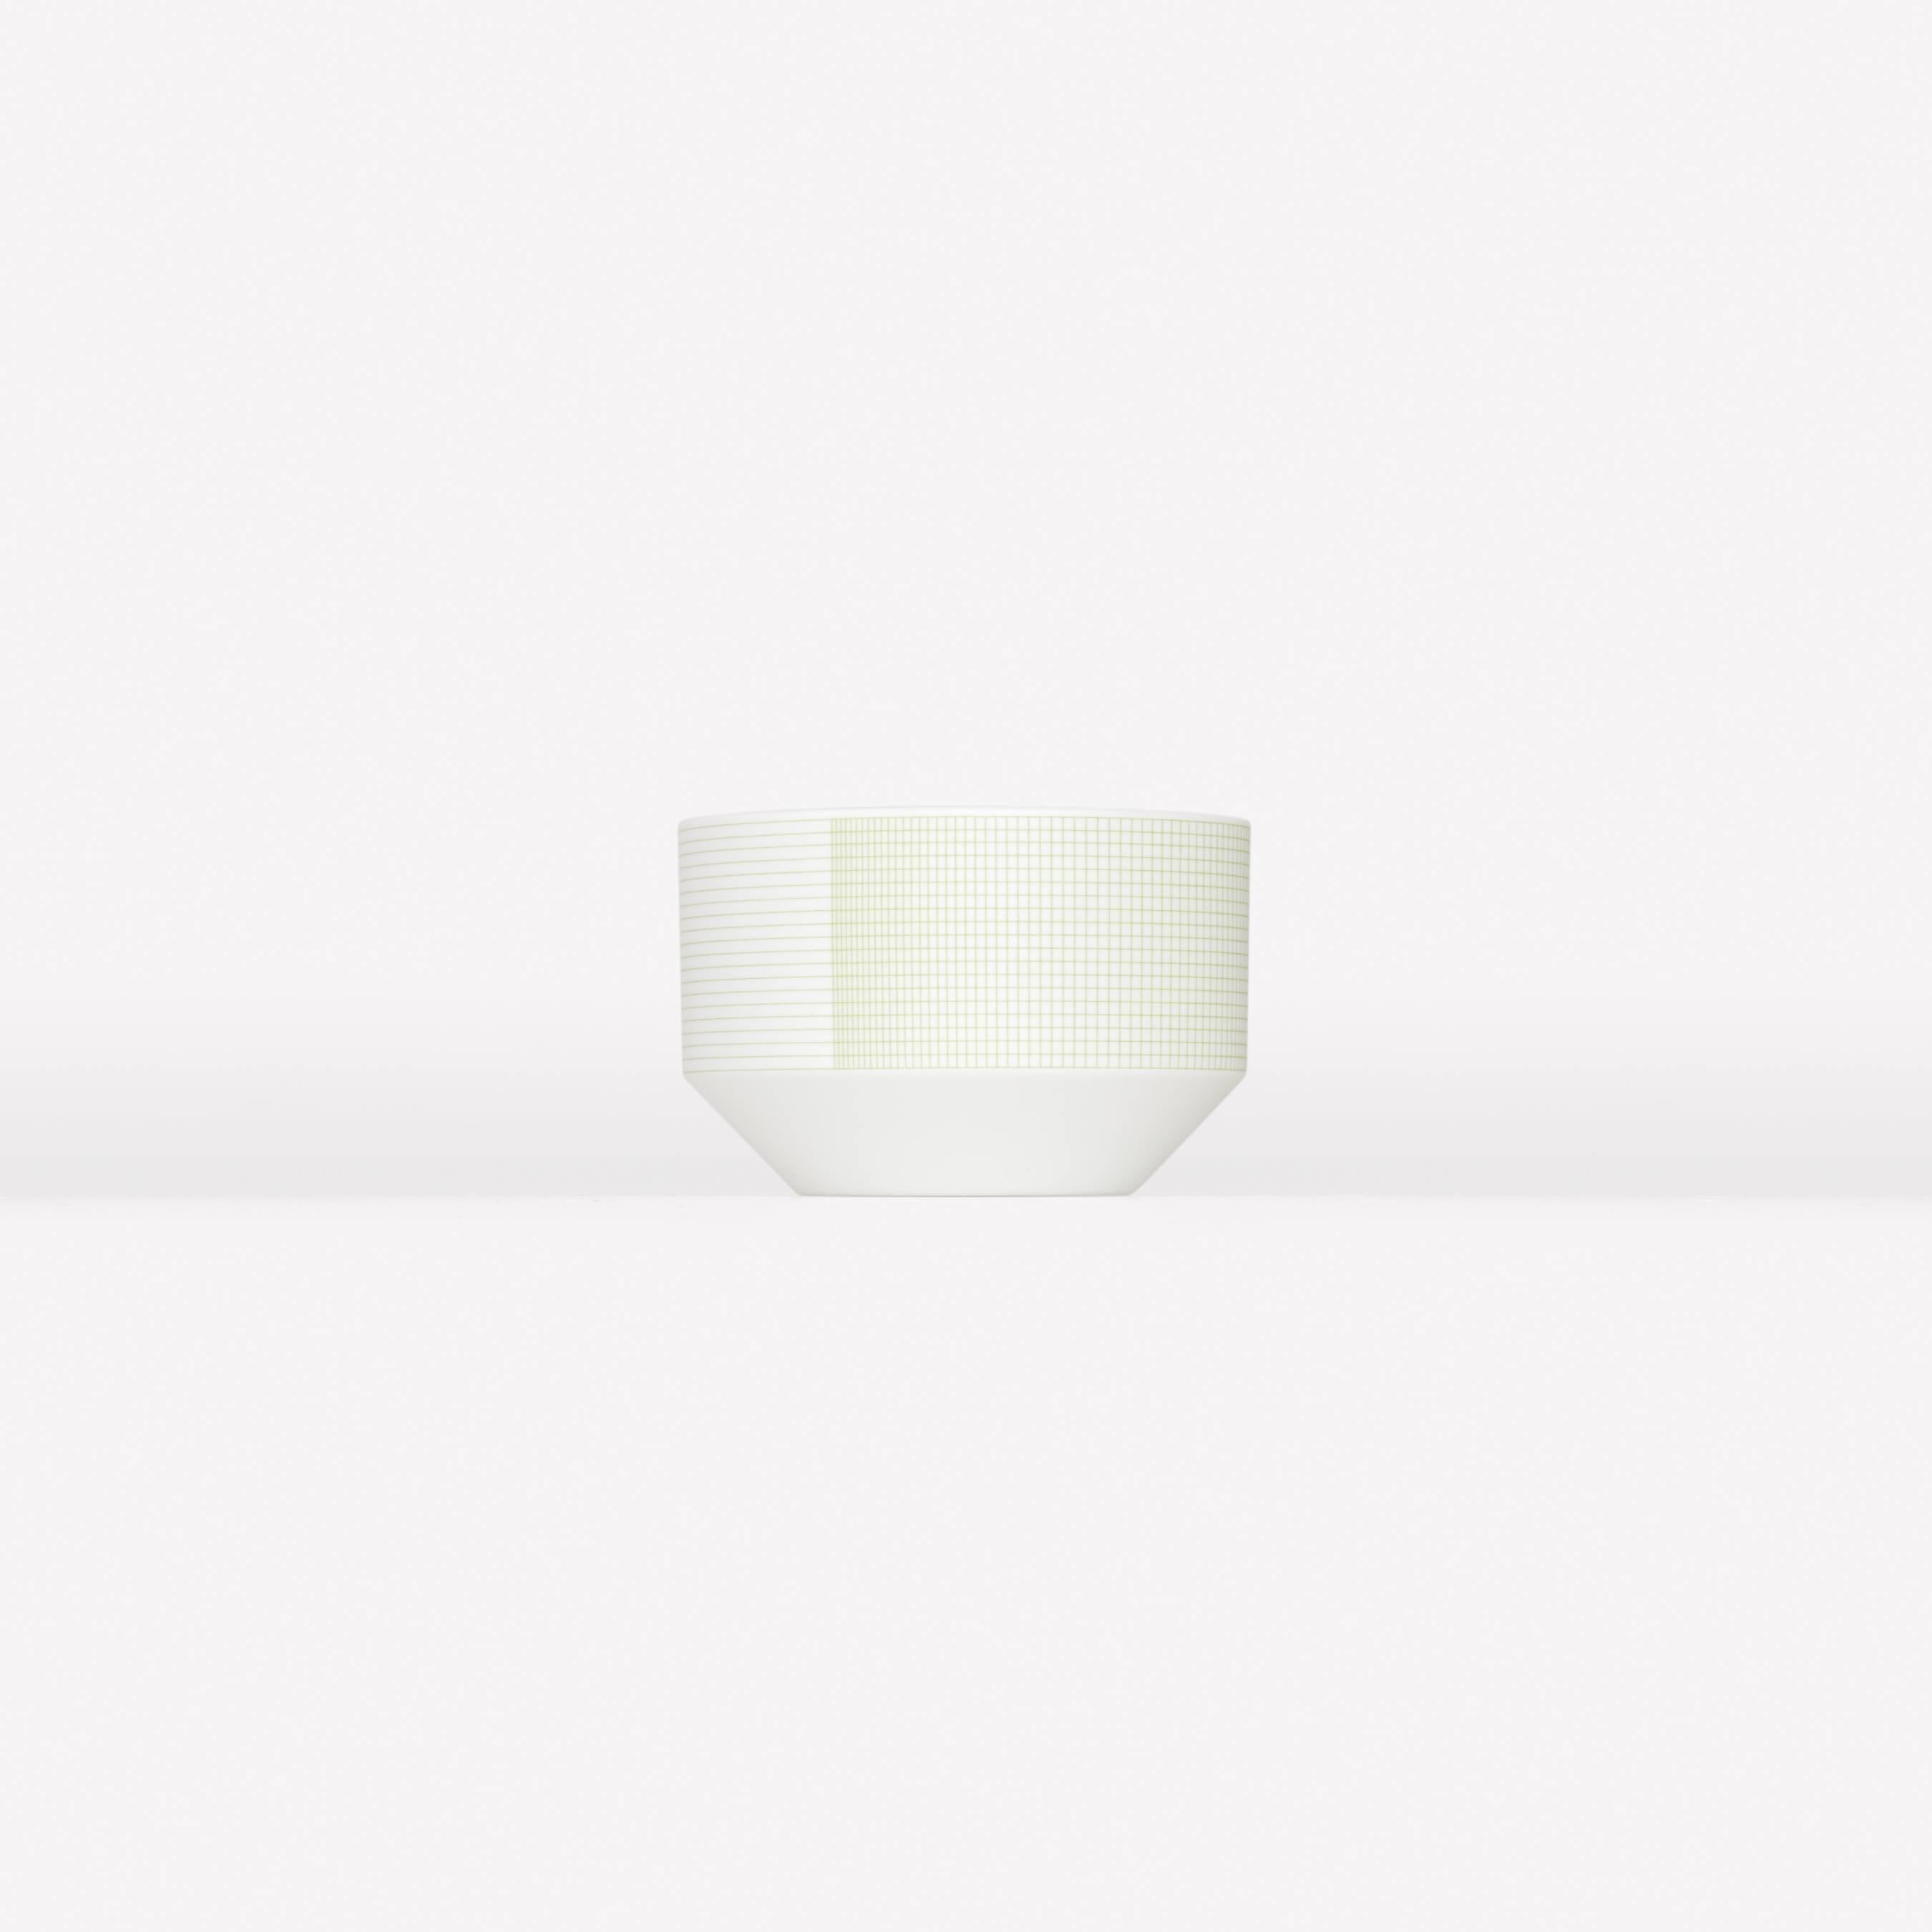 Pattern Porcelain Cup by Scholten & Baijings
001 Matcha

Porcelain with Grid textile graphic. Matte exterior with gloss interior. Made in japan by 1616 / arita Japan. Dishwasher safe.

Scholten & Baijings for Maharam is a collection of home